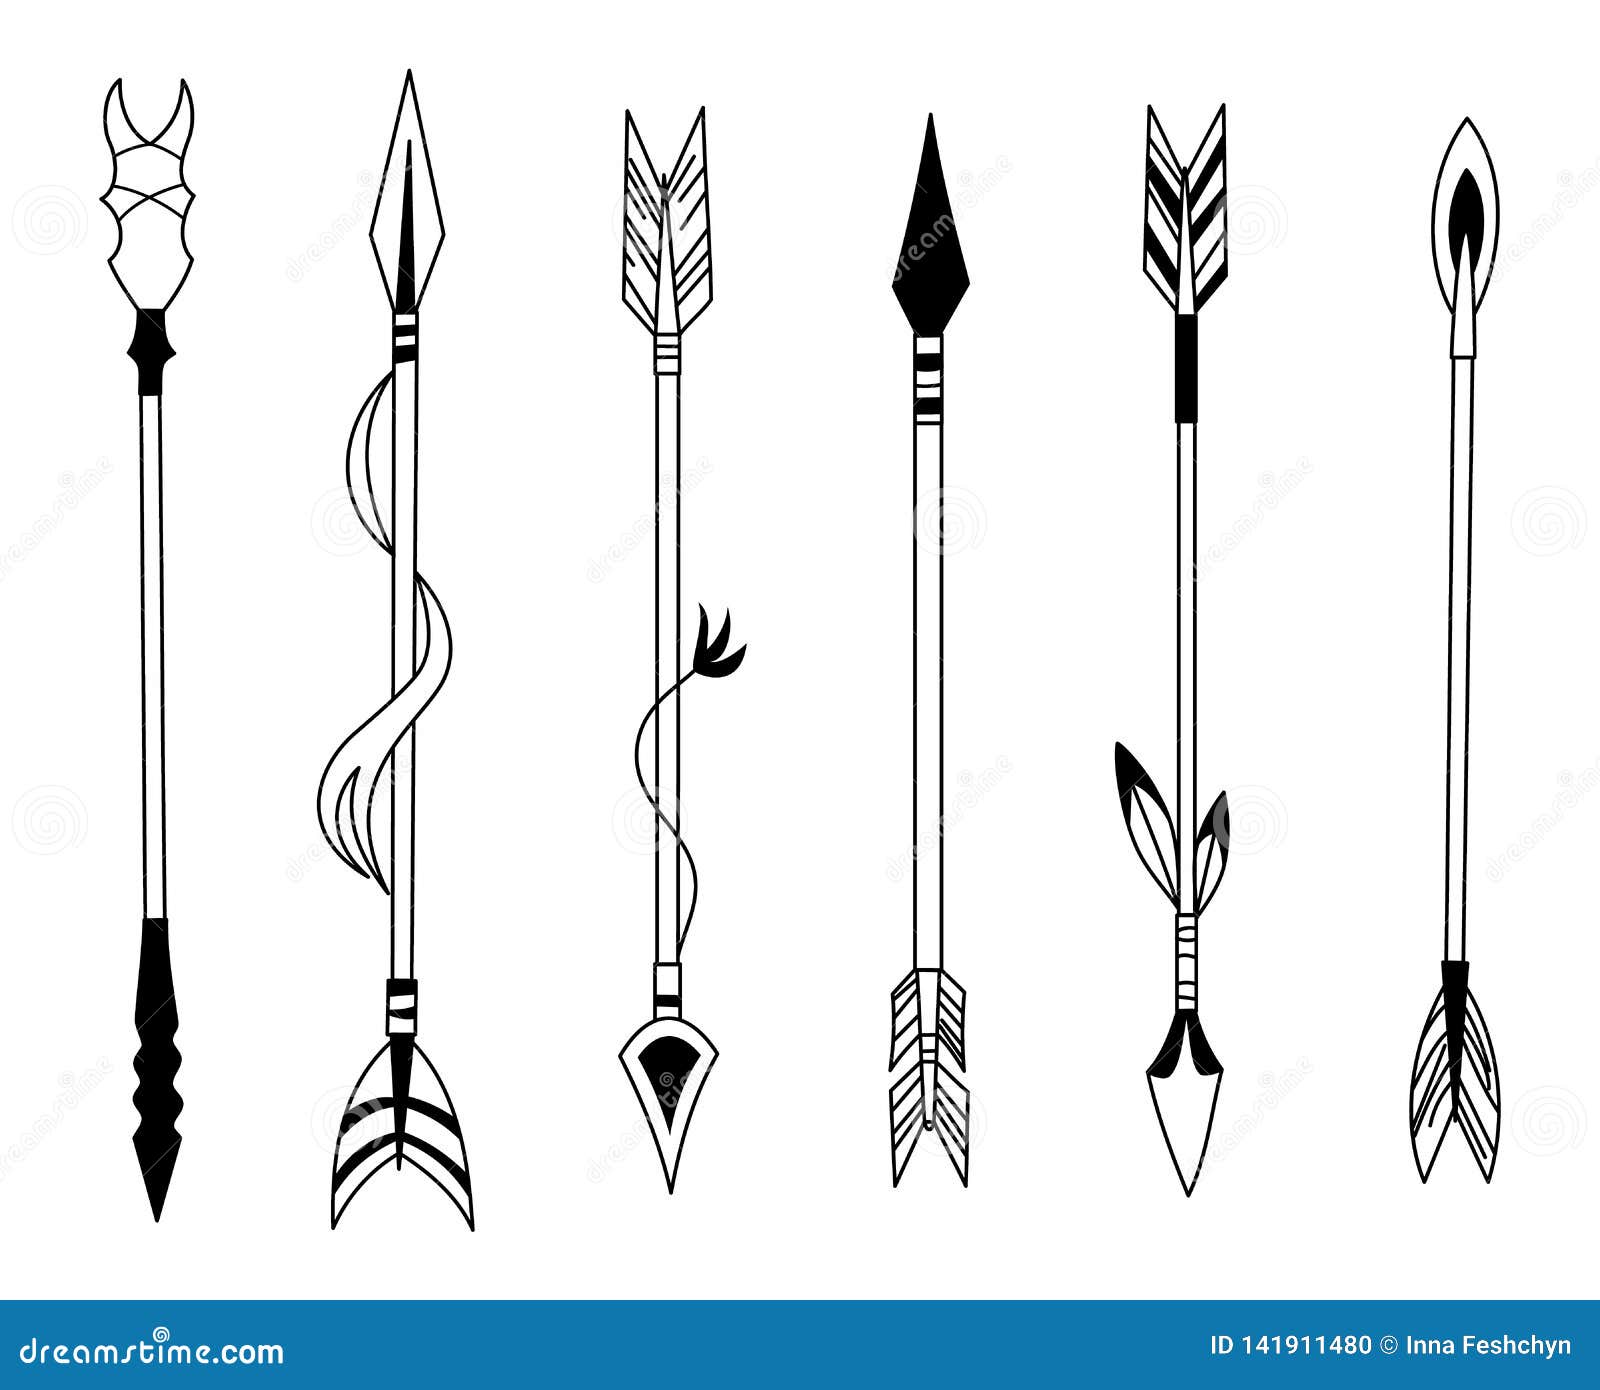 Native American Arrow Drawing Images  Free Download on Freepik